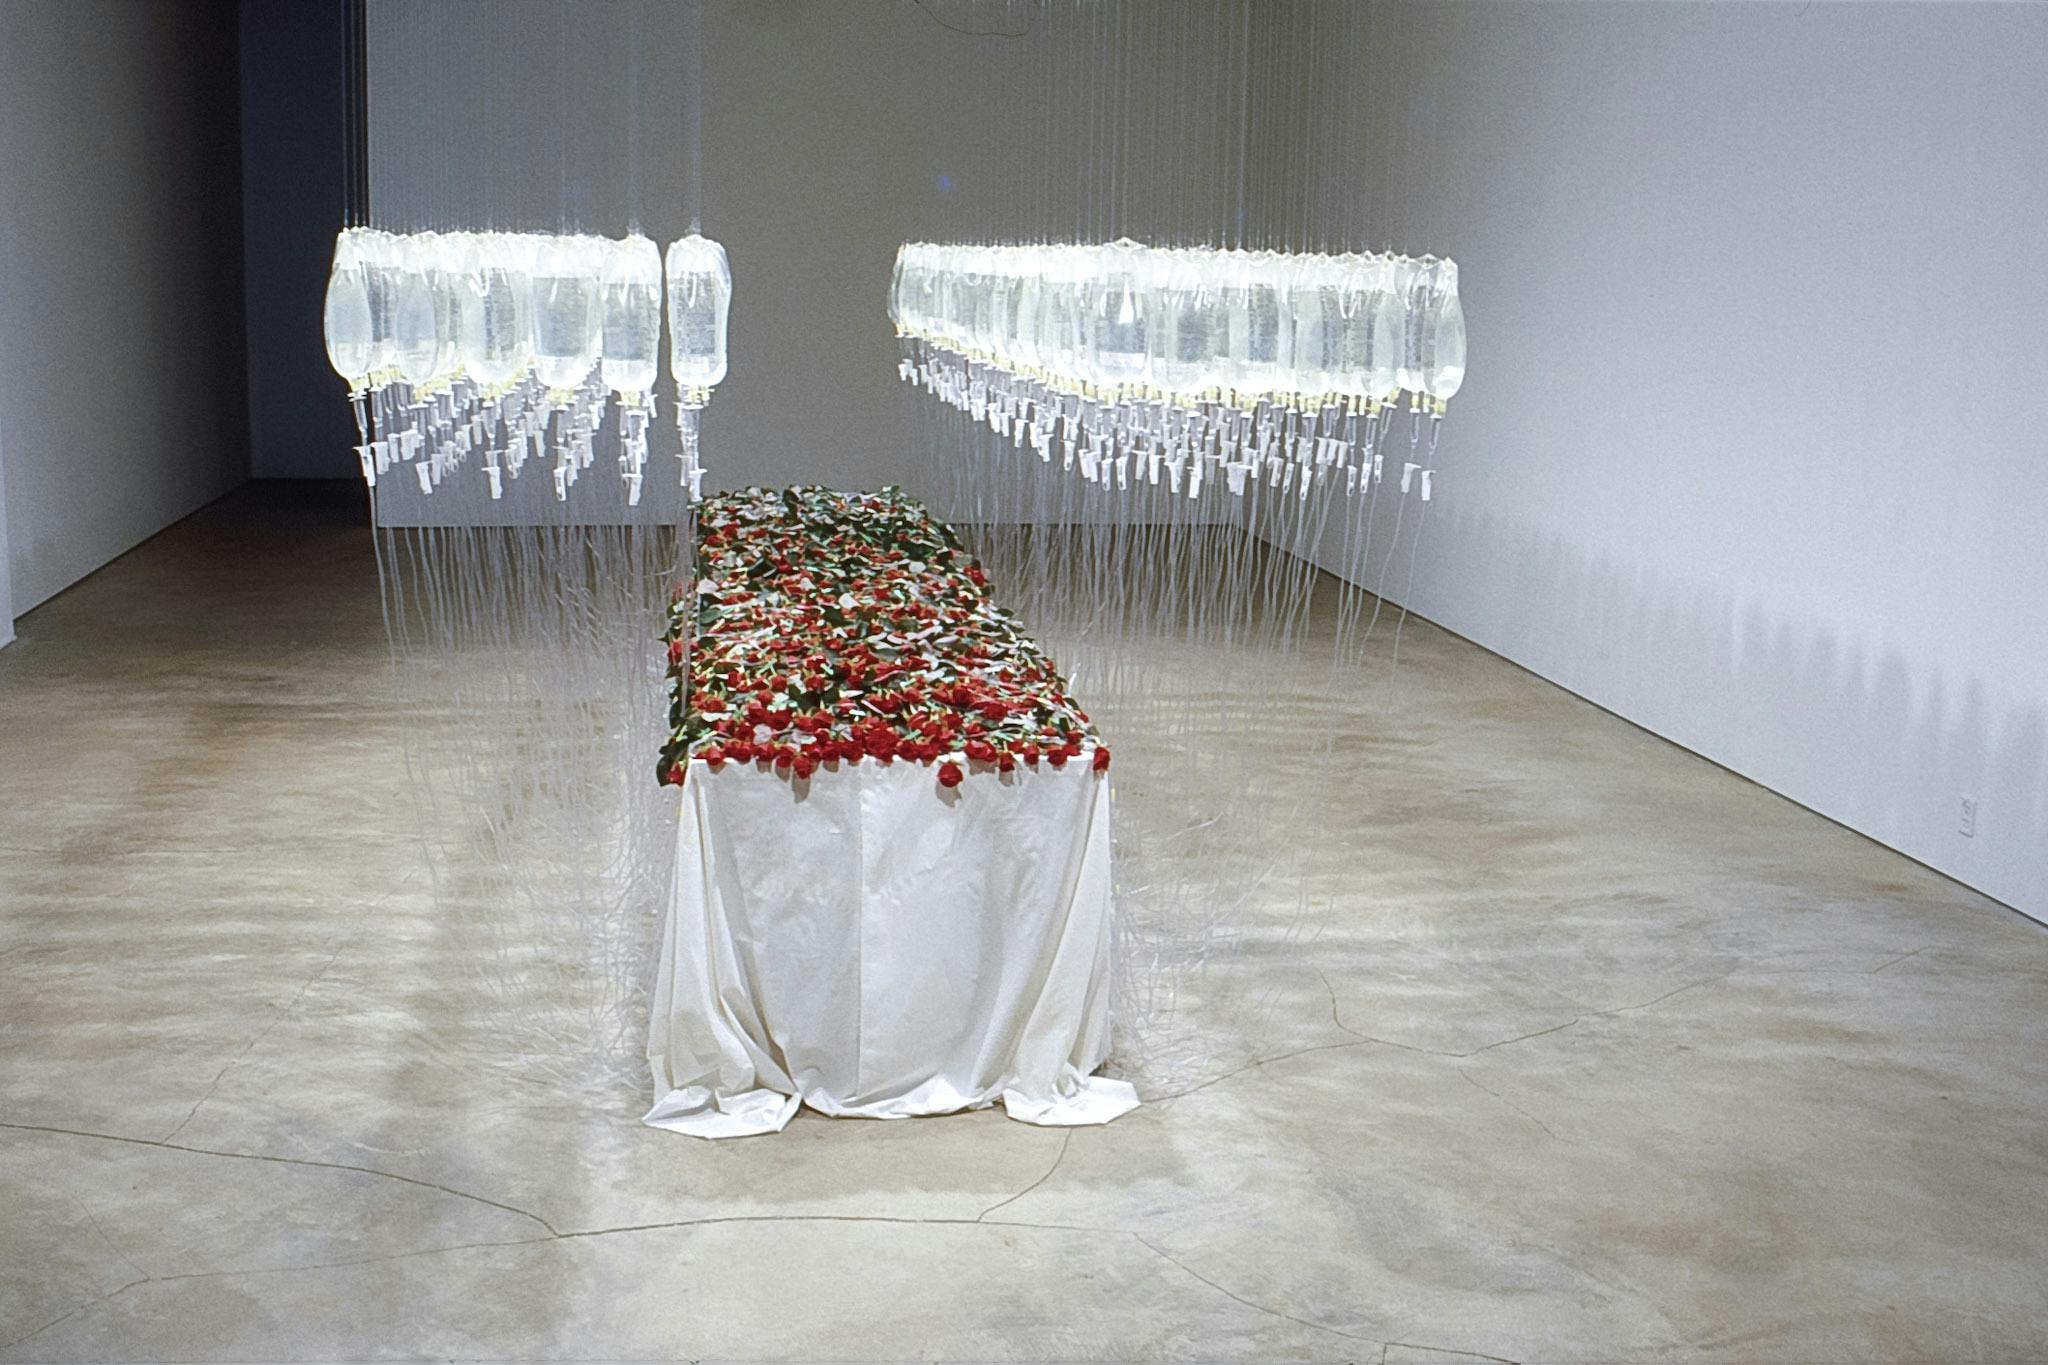 A person-sized art installation is in the gallery. It is a bed covered by a white sheet. Dozens of red roses, which are tied to the infusion bags hanging from the ceiling, are placed on the bed.